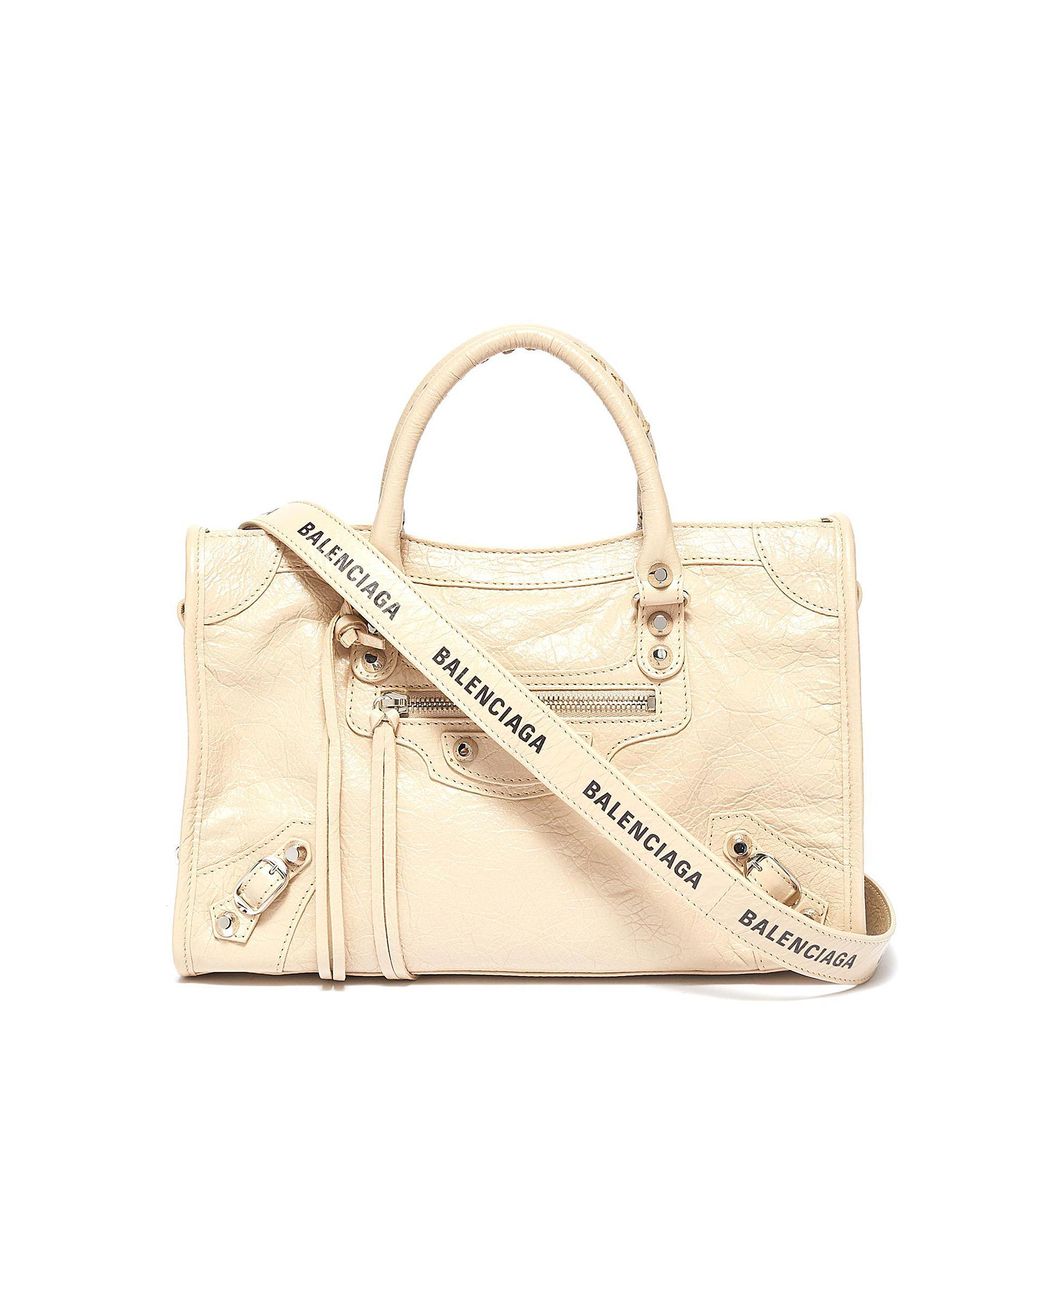 Balenciaga 'classic City' Logo Strap Small Leather Shoulder Bag in Light  Beige (Natural) | Lyst